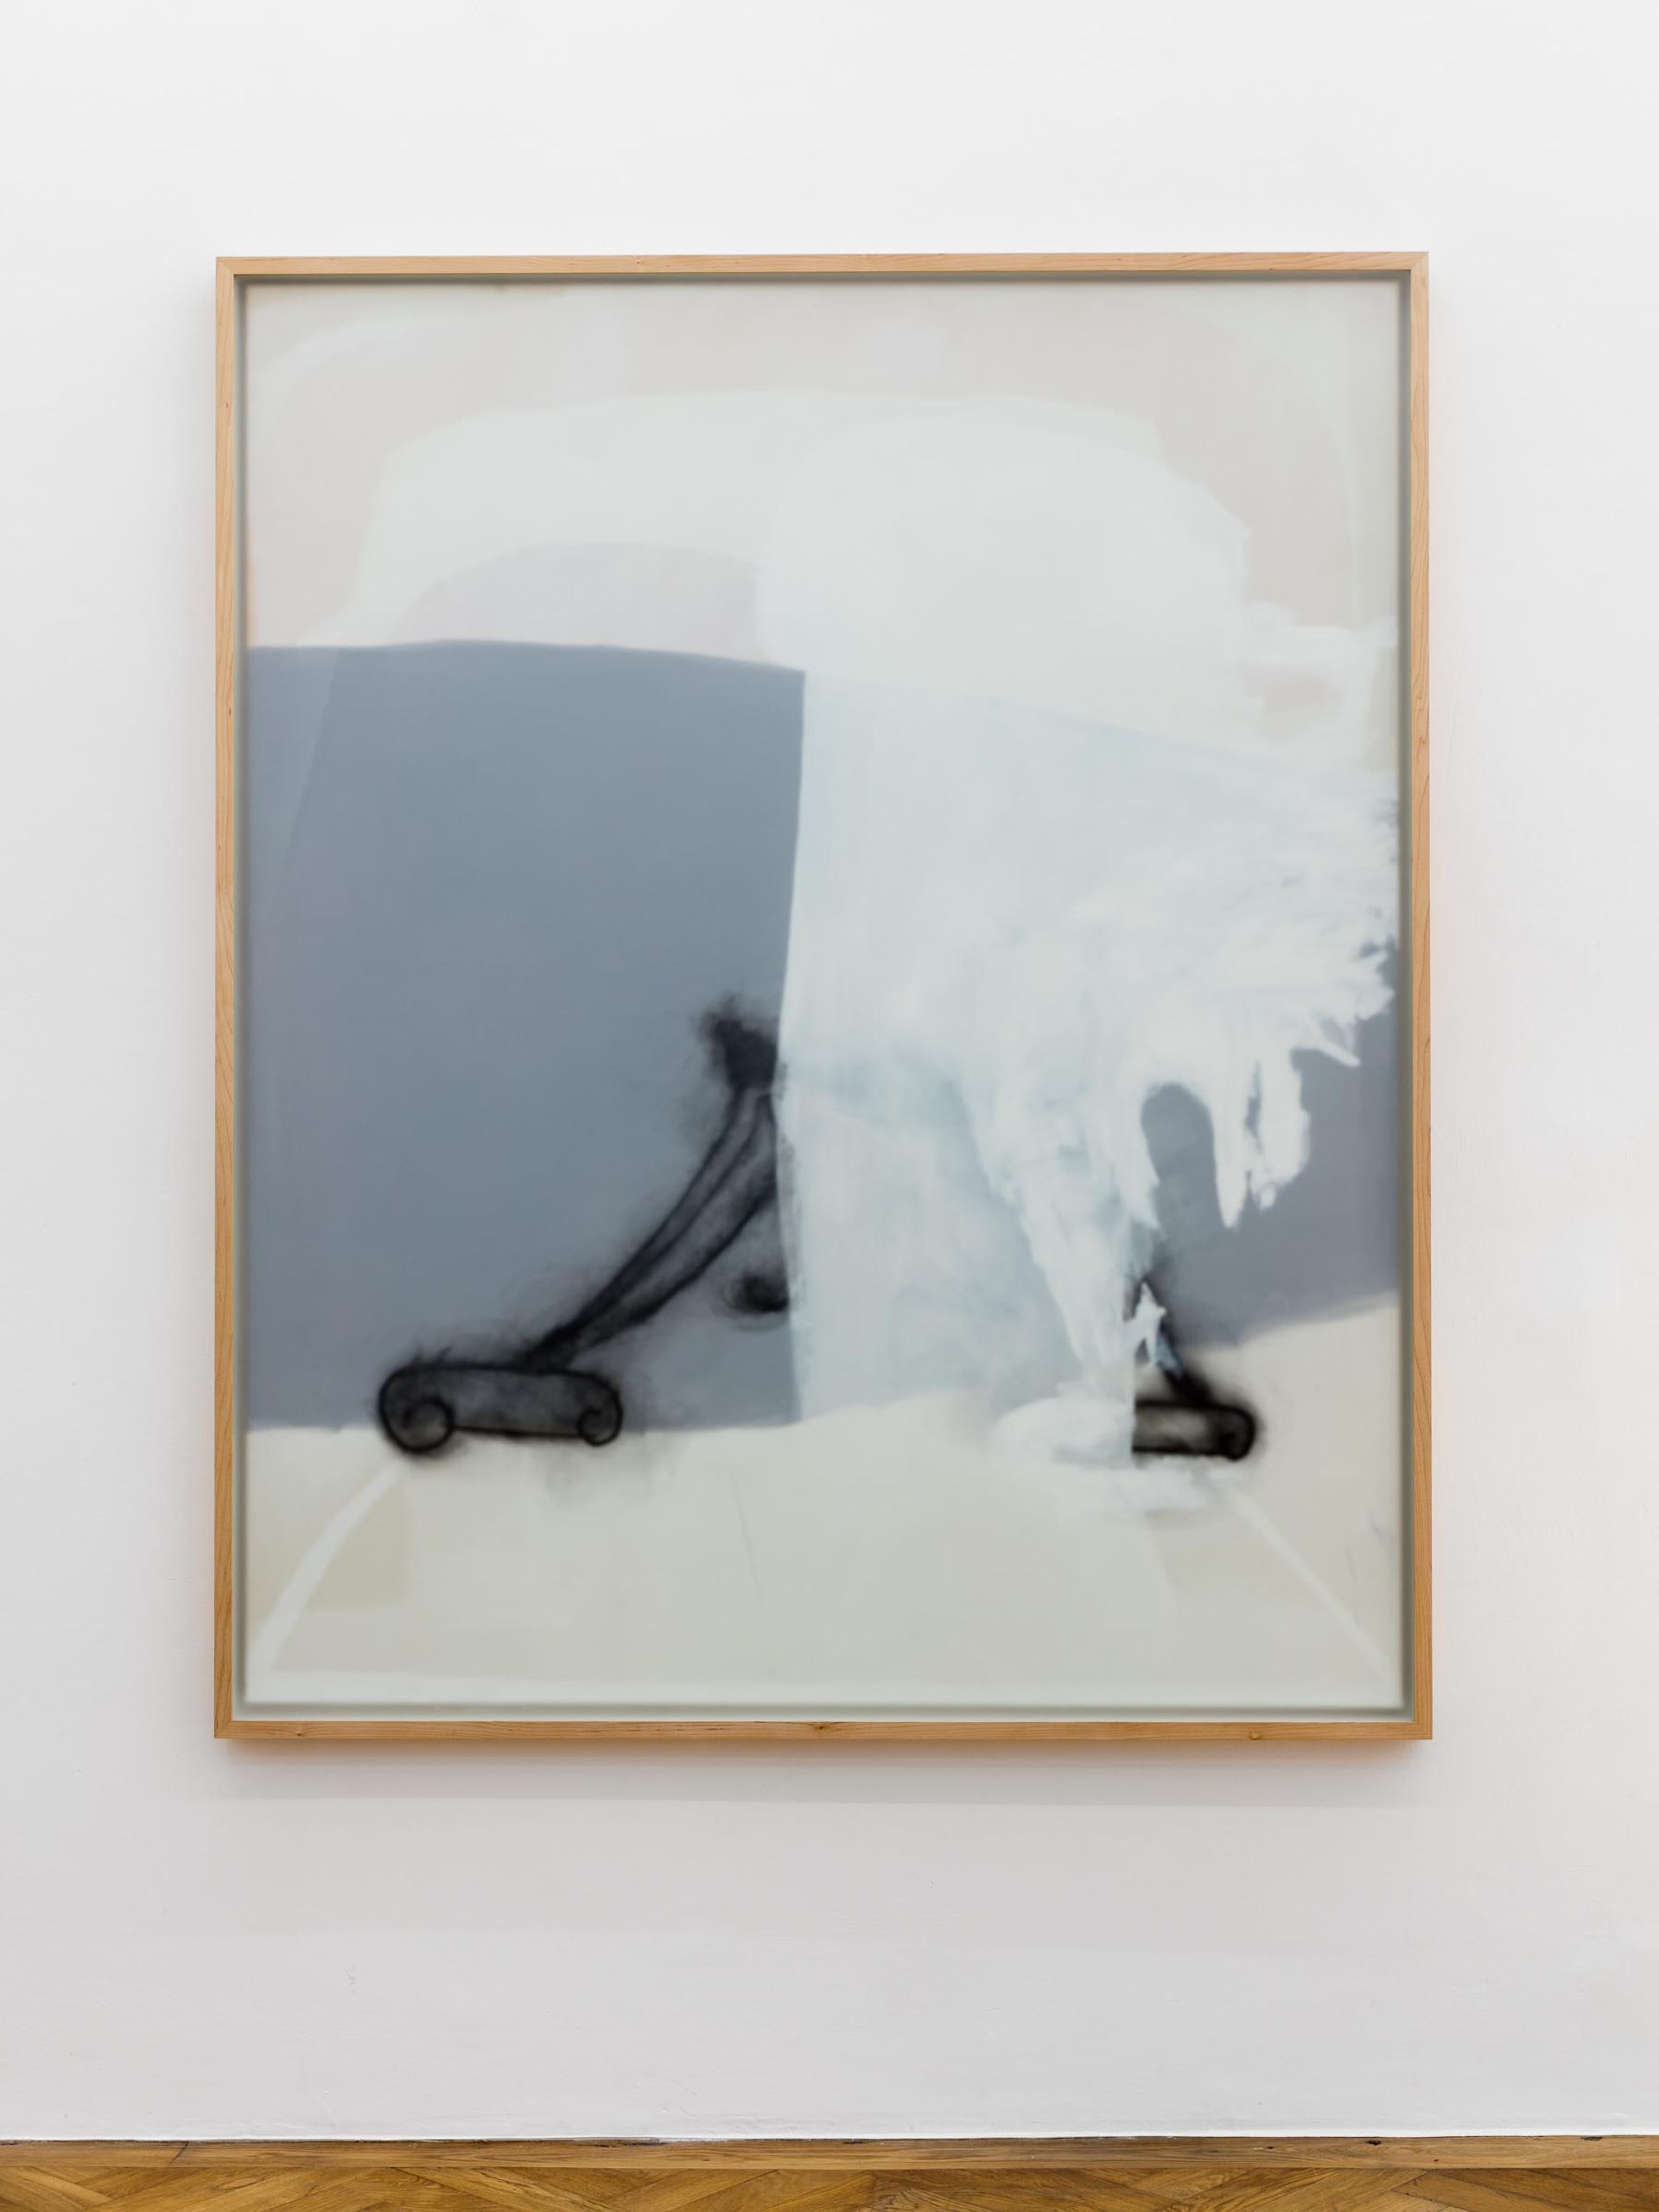 Malte Zenses, Orgelblut, 2019, oil and pencil on canvas, opal glass and maple wood, 136 × 166 cm